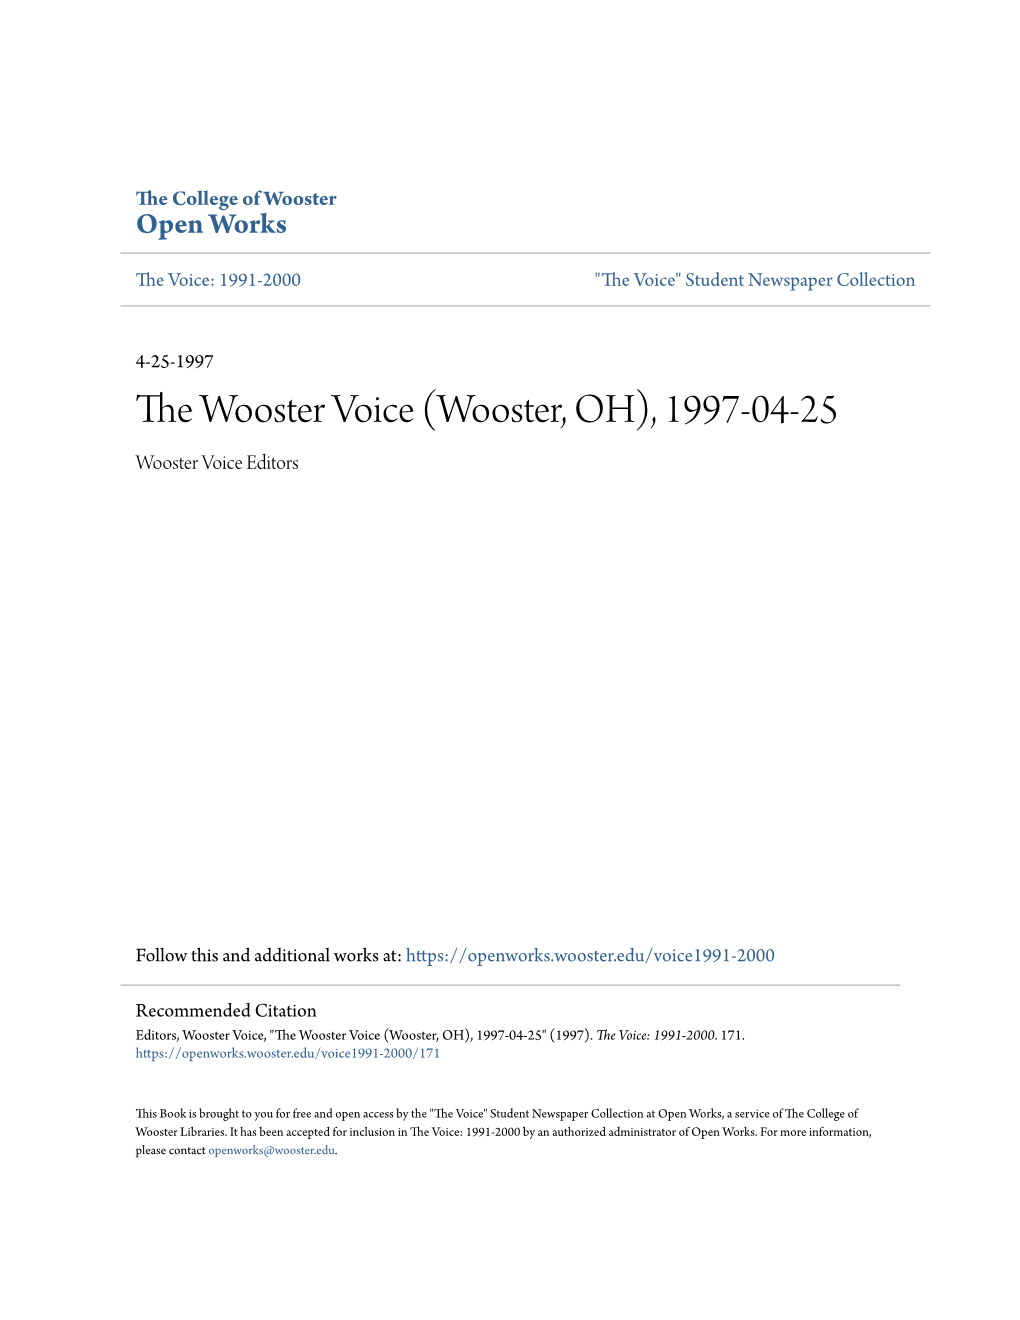 The Wooster Voice (Wooster